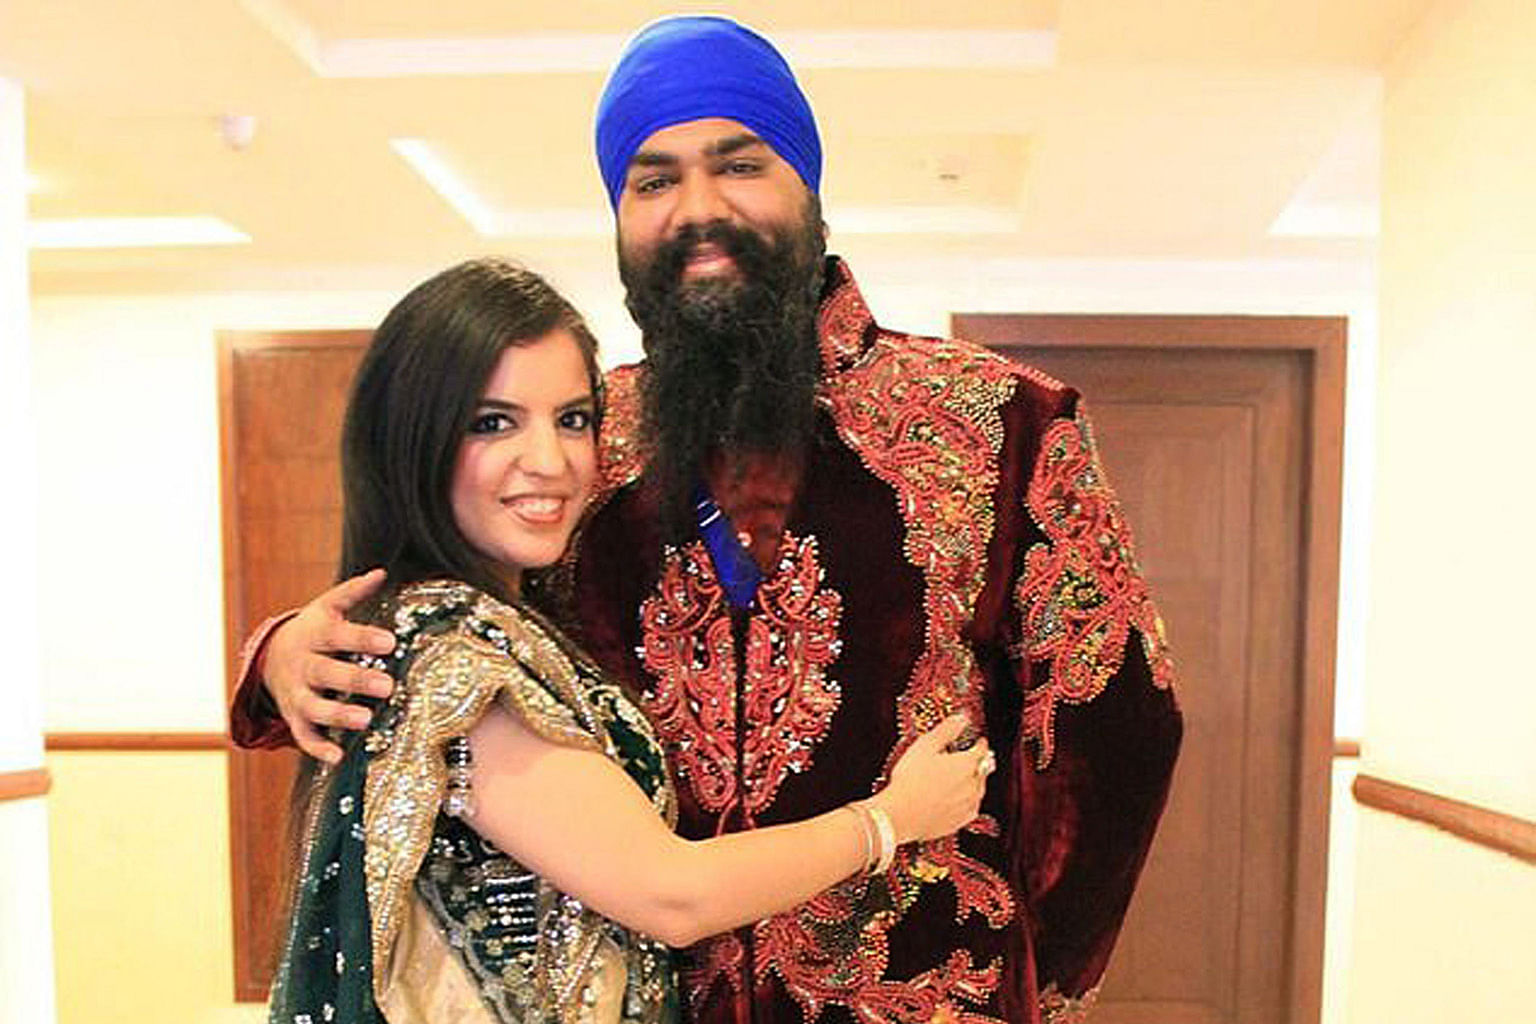 Singaporean housewife Bandhna Kaur Bajaj with her British husband Amitpal Singh Bajaj. Mr Amitpal was attacked in their hotel room in Phuket last Wednesday. He was taken to a hospital, where he was pronounced dead. PHOTO: THAI SIKH NEWS/FACEBOOK